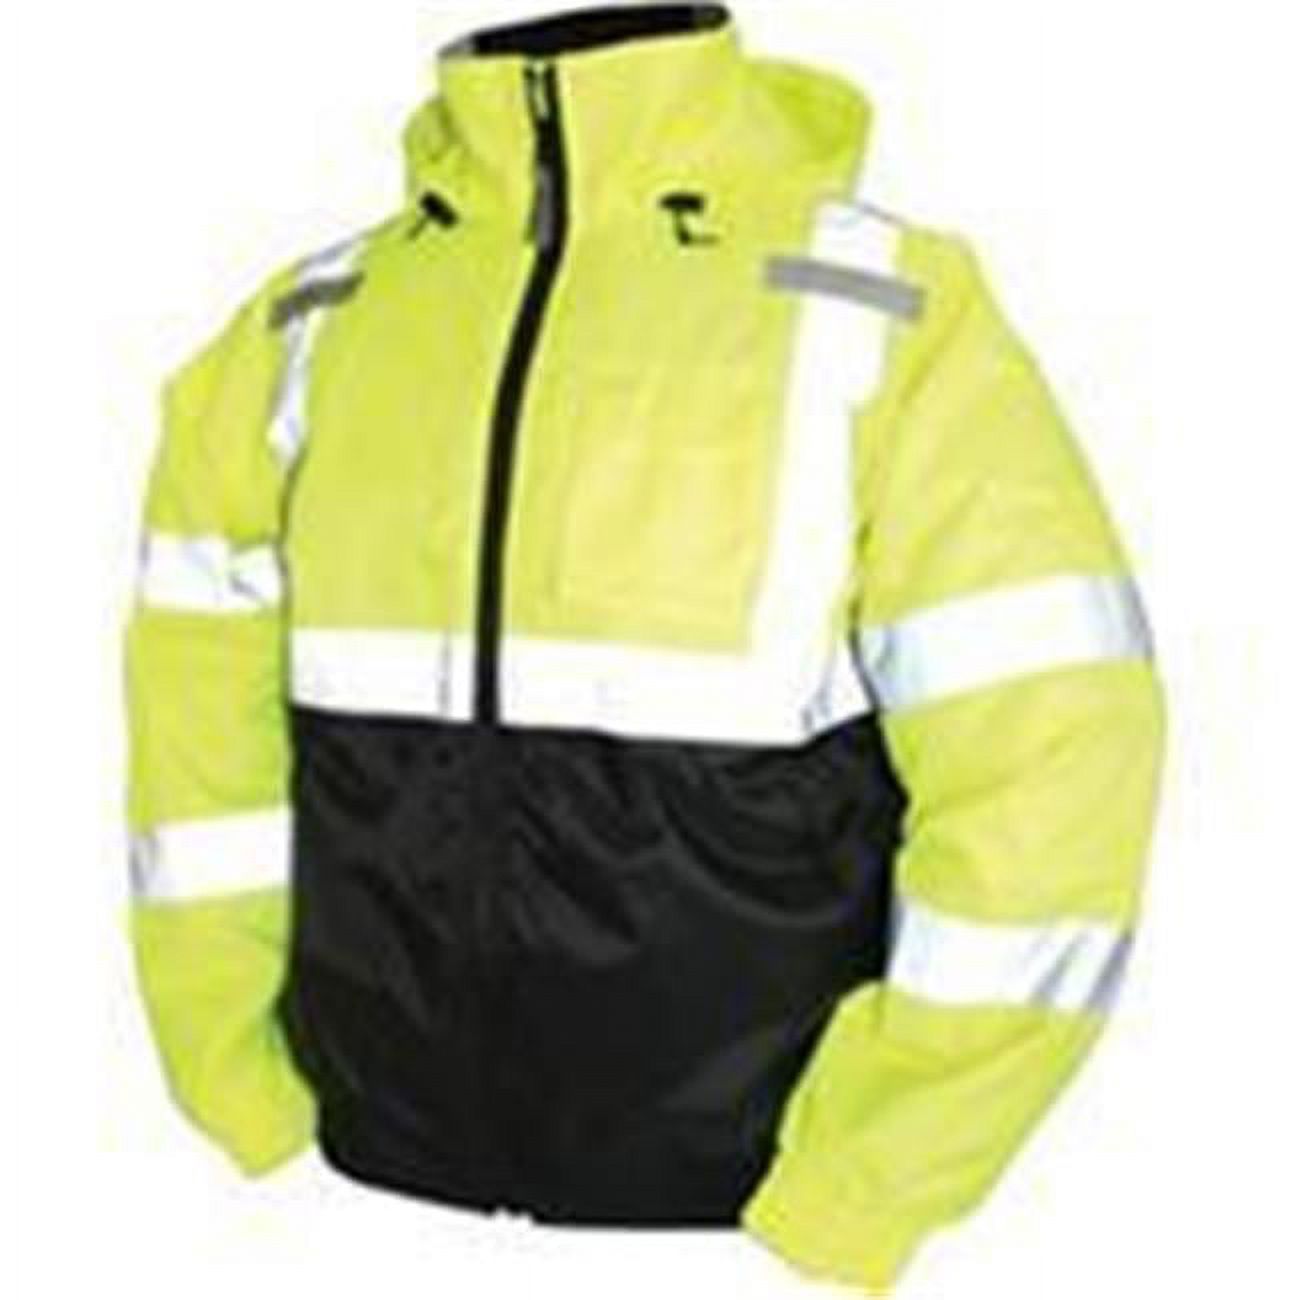 Tingley Rubber Corp.-Bomber Ii High Visibility Waterproof Jacket- Lime Green 2 Extra Large - image 1 of 4